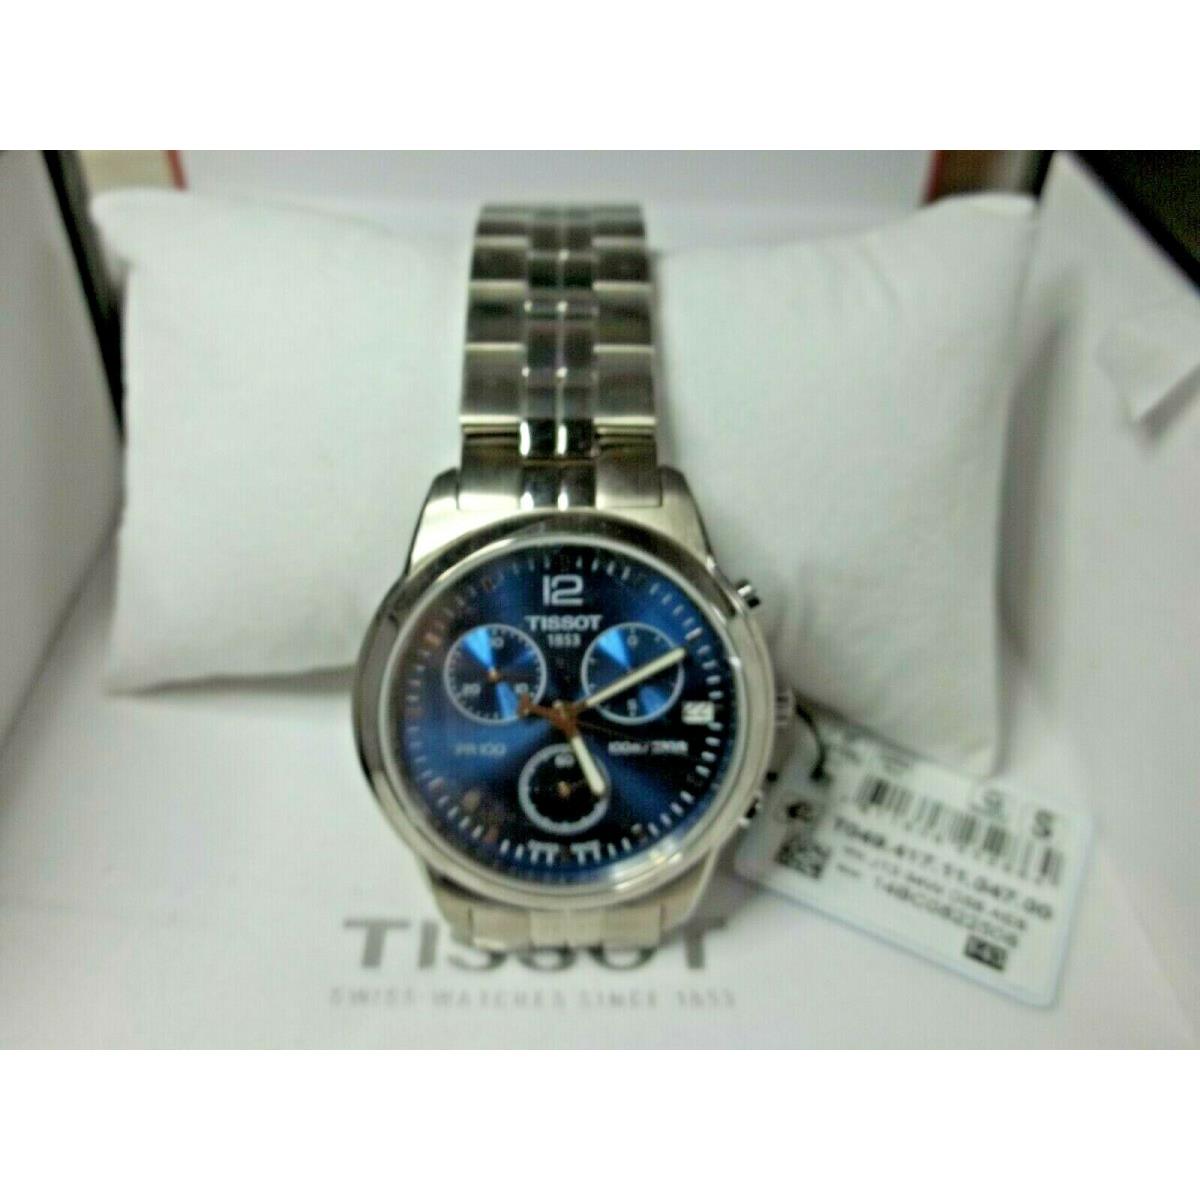 Tissot watch  - Blue Dial, Silver Band 2